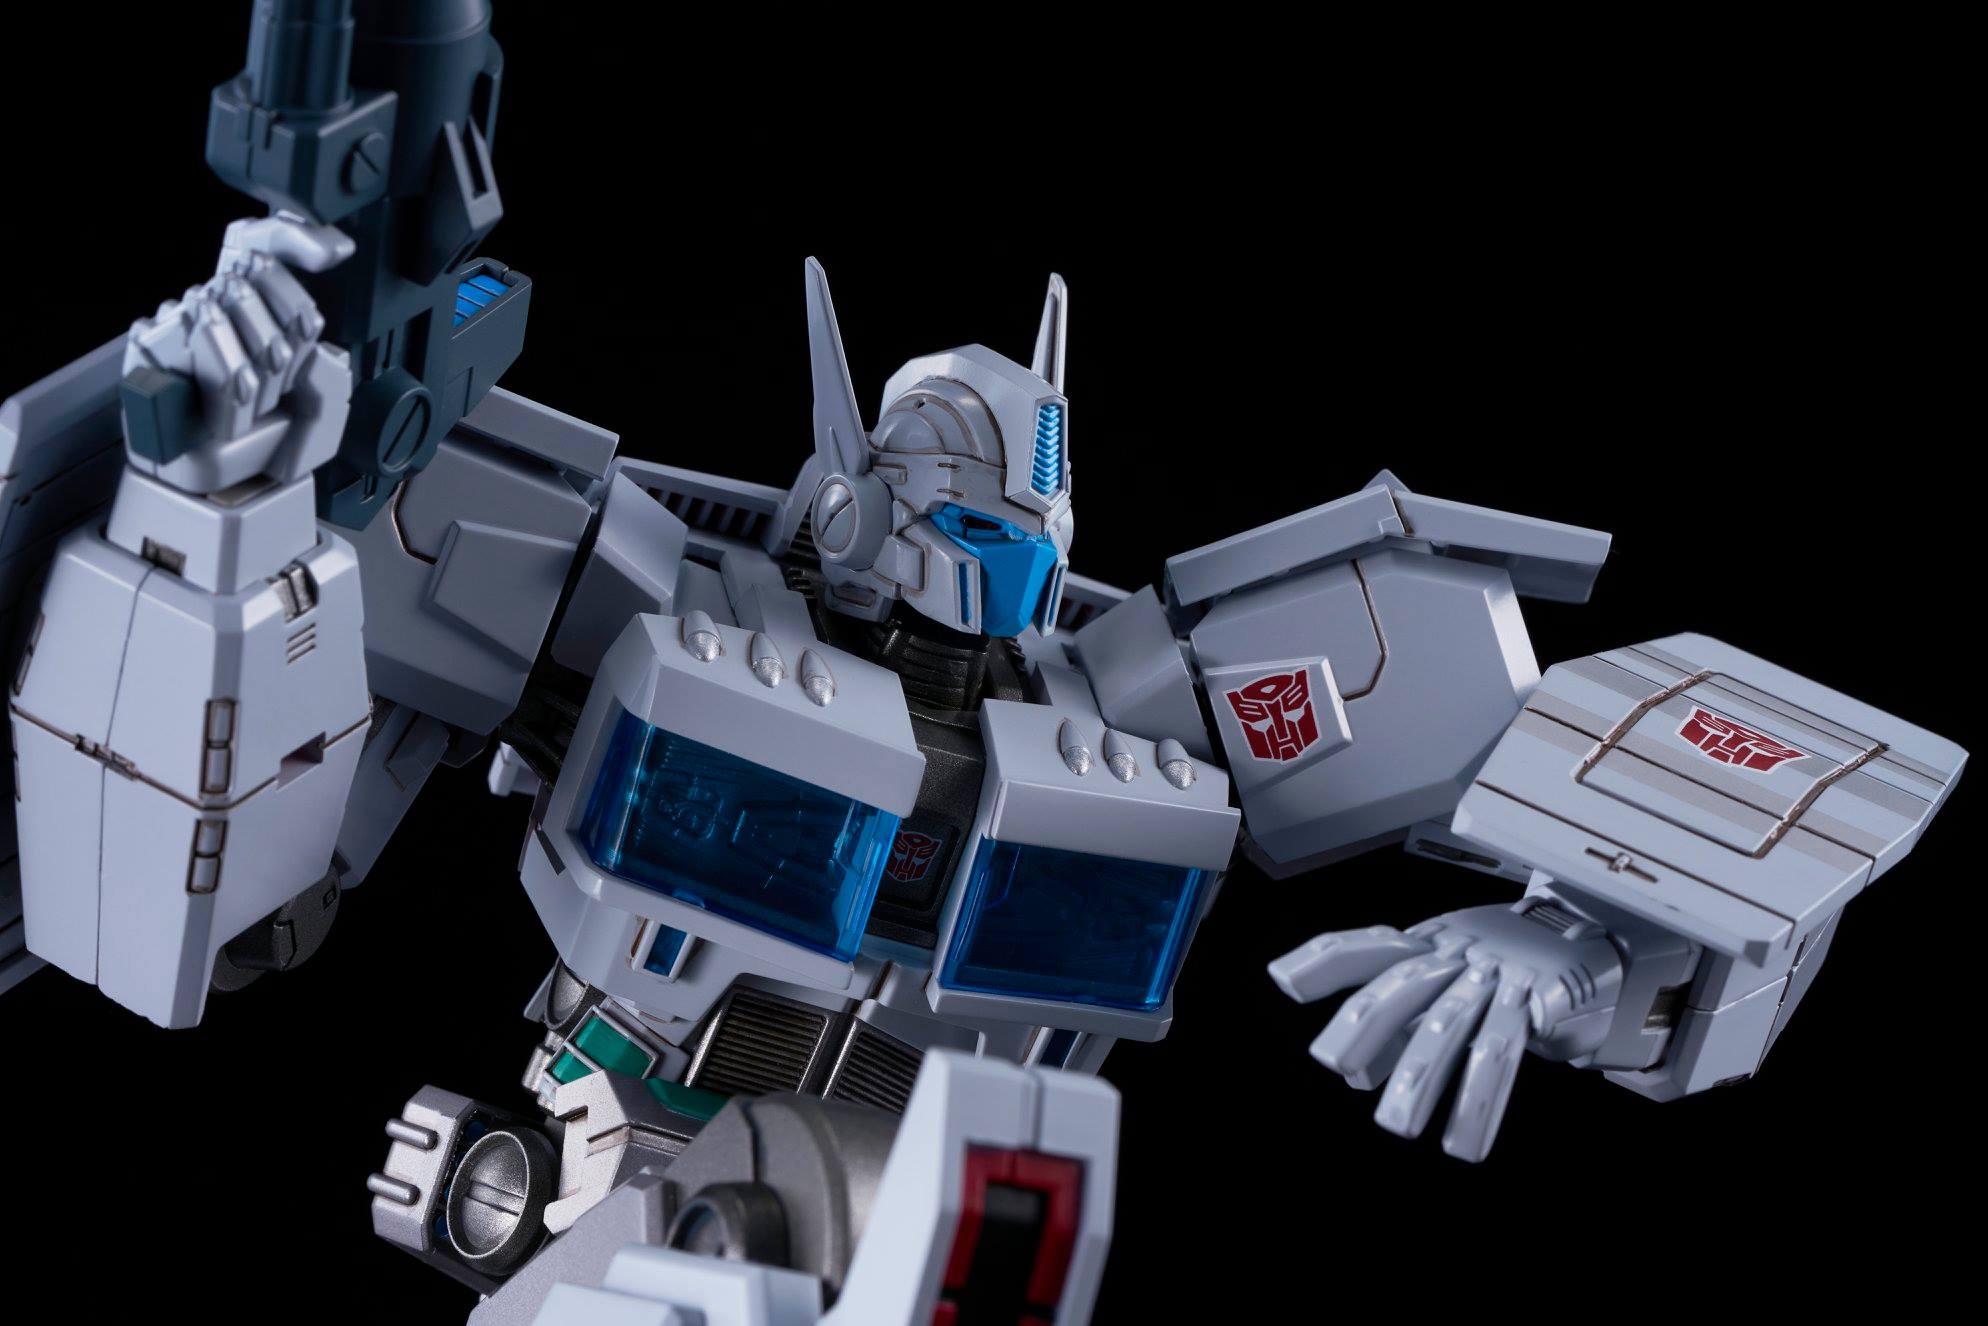 flame_toys-ultra_magnus_idw-5